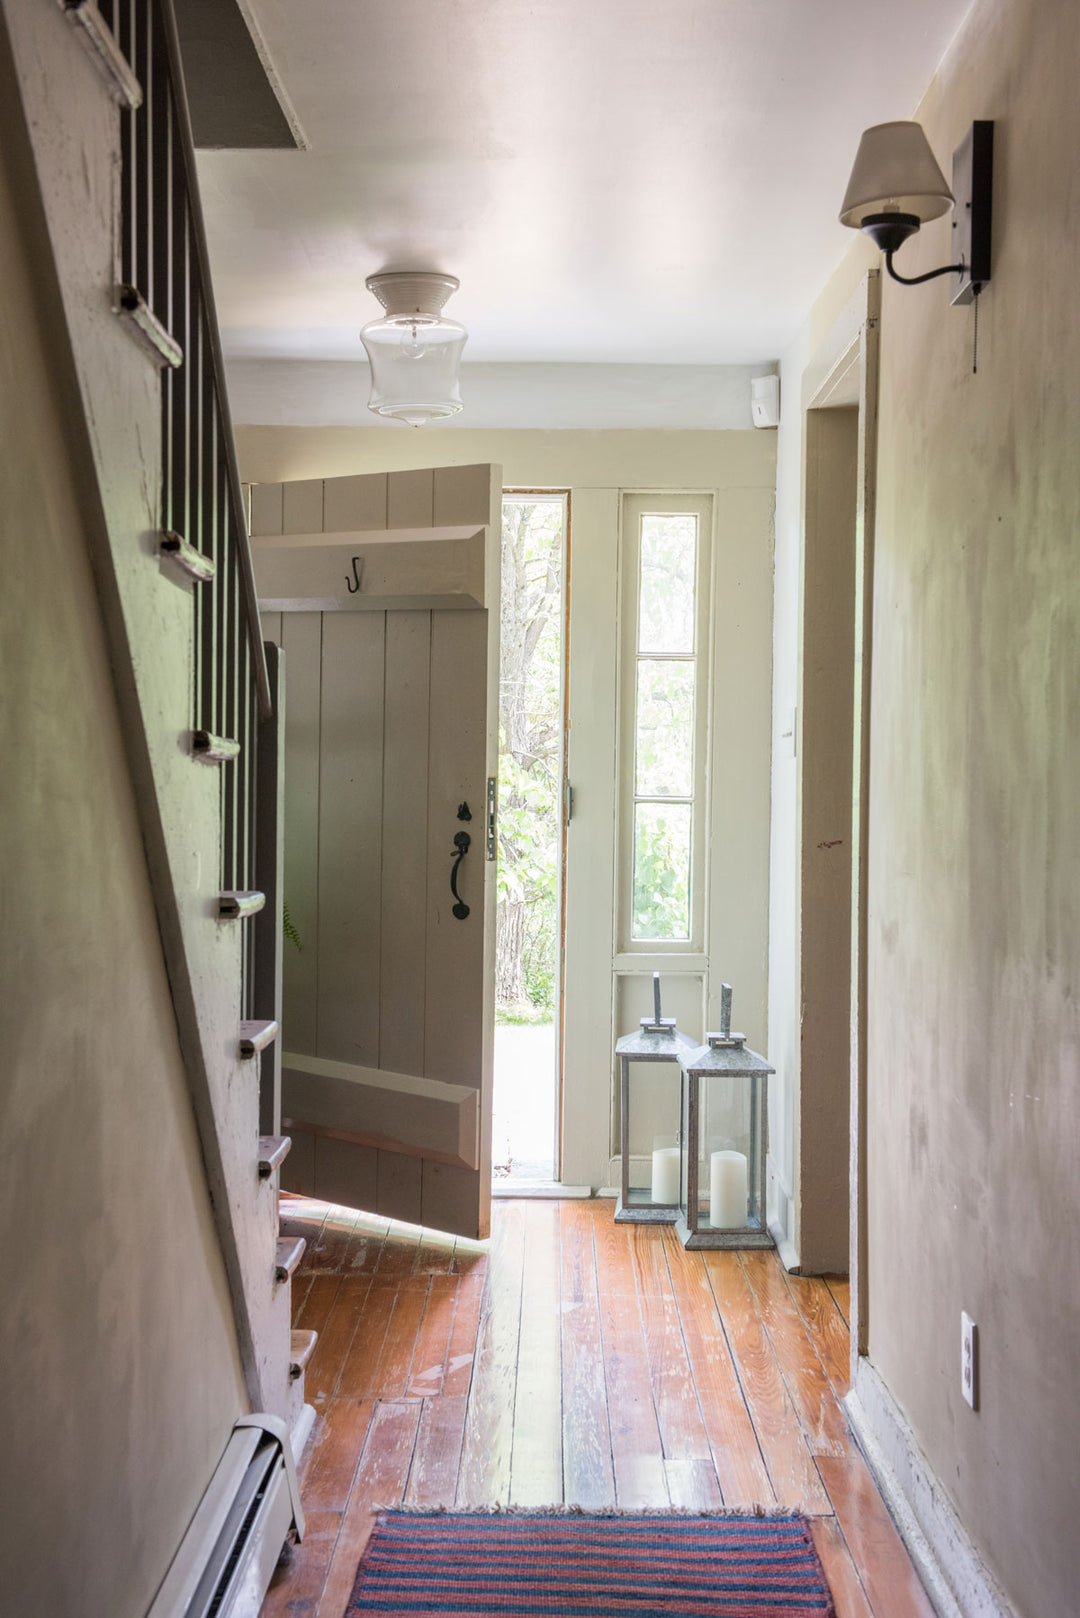 Hallway in old Colonial-style house with neutral colors, open door, and hardwood floors